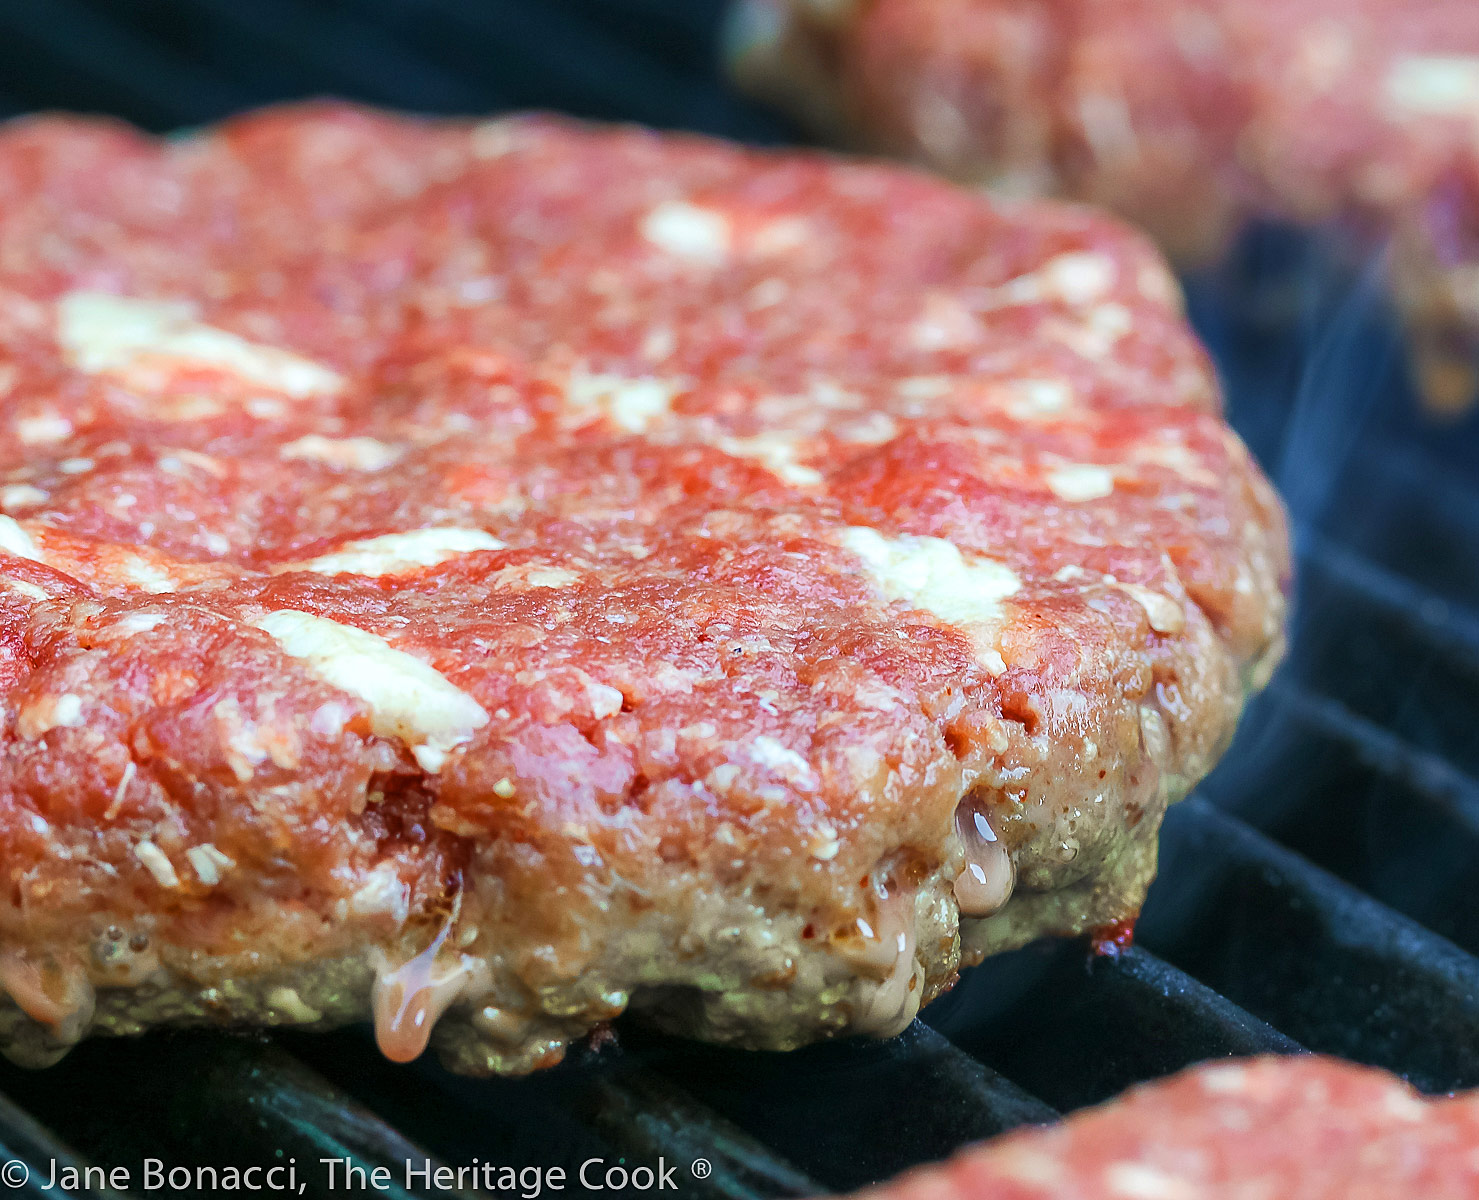 Hamburger patty cooking on the grill, showing the pieces of bacon fat. 